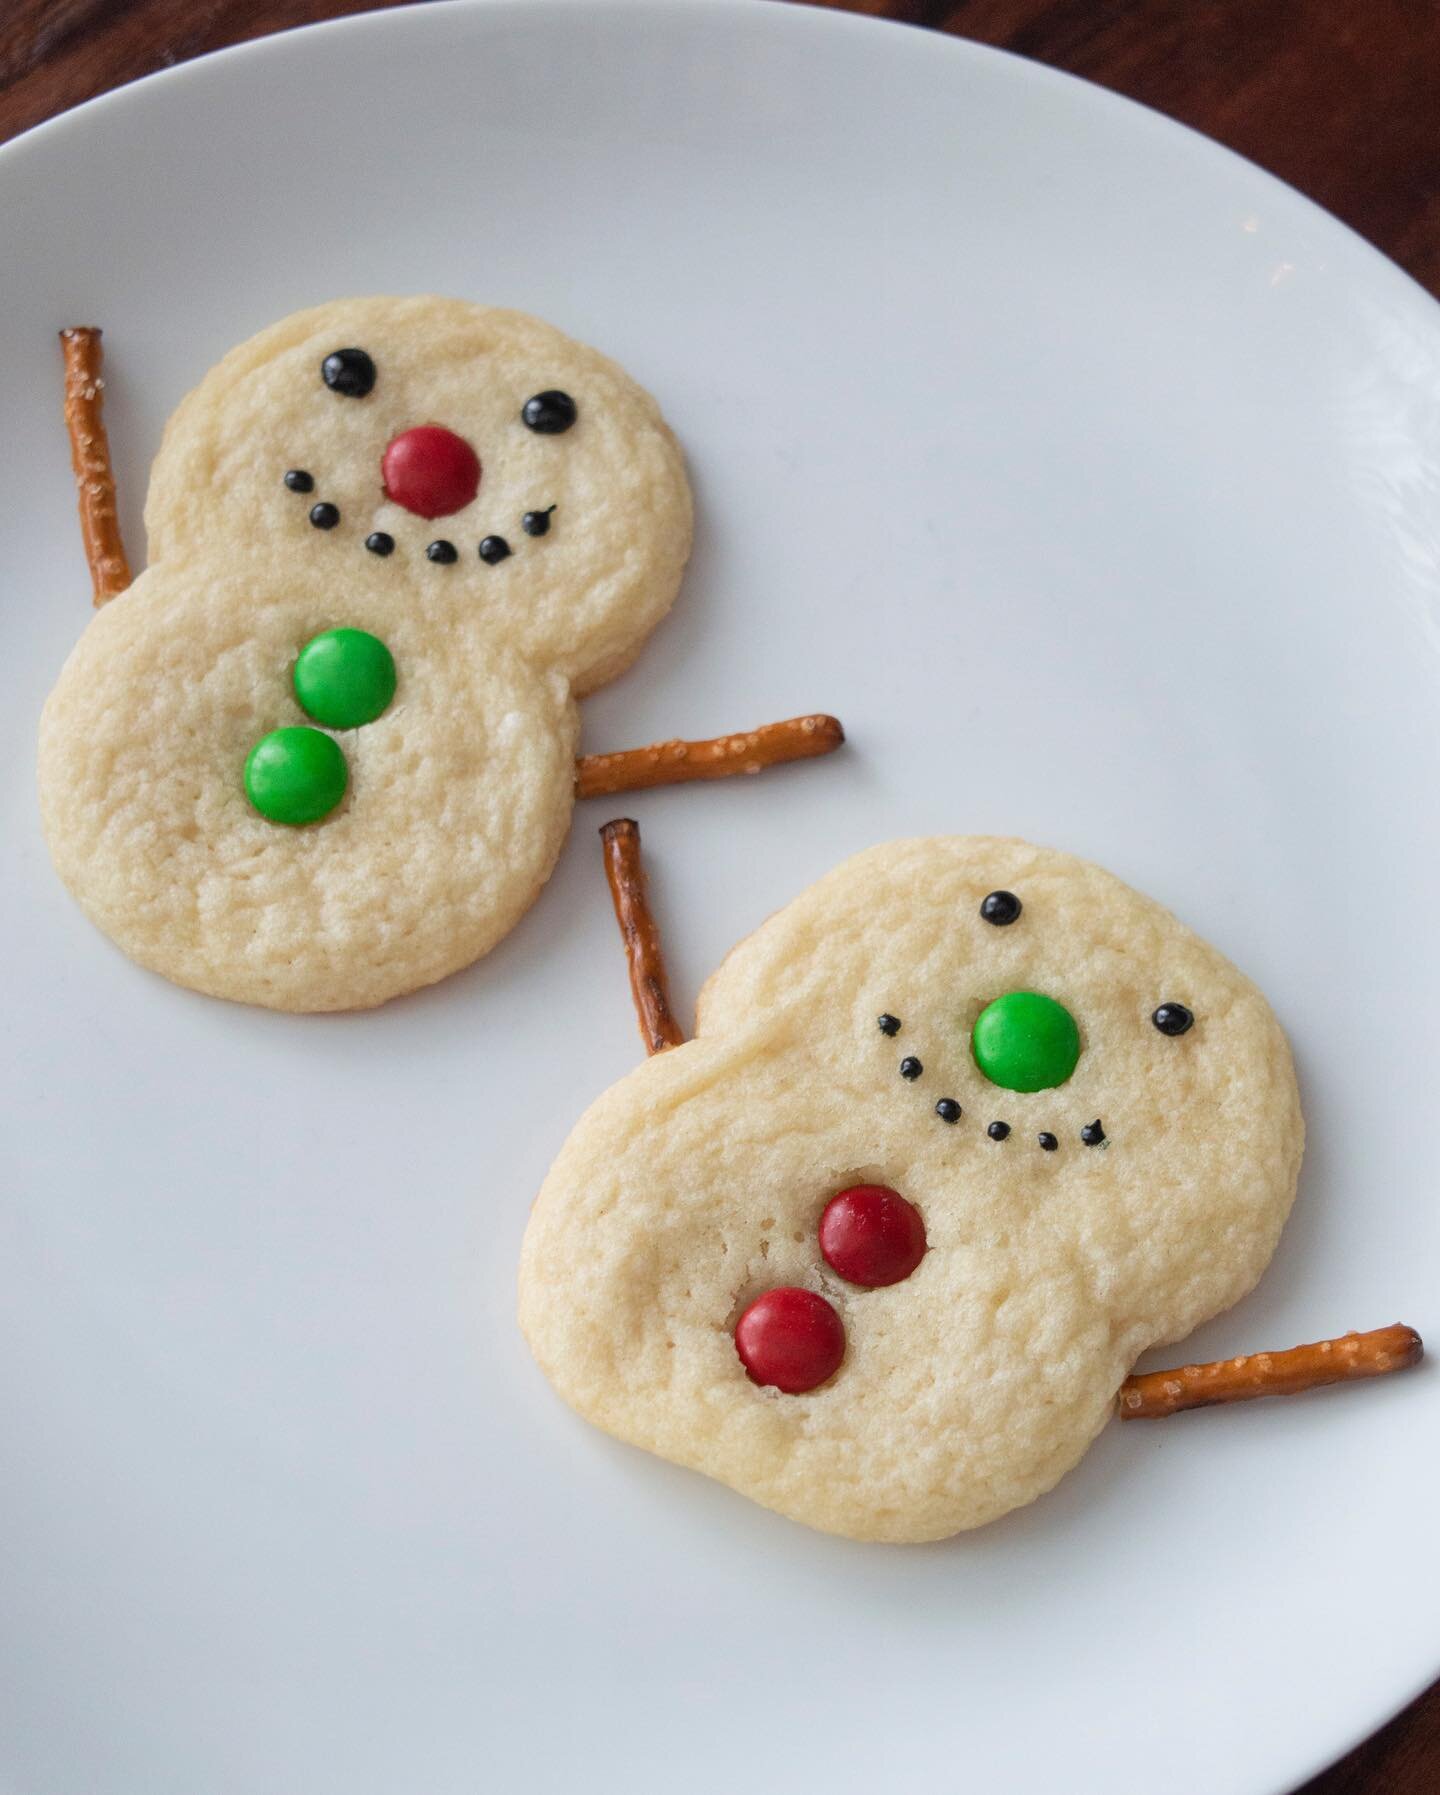 Merry Christmas Eve! Need a fun idea for Santa&rsquo;s cookies tonight? Try decorating sugar cookies like snowmen with pretzel sticks, m&amp;m&rsquo;s, and mini chocolate chips or black icing. Super easy &amp; fun! ⛄️🍪

📸 Tag us @iqaccessories.inc 